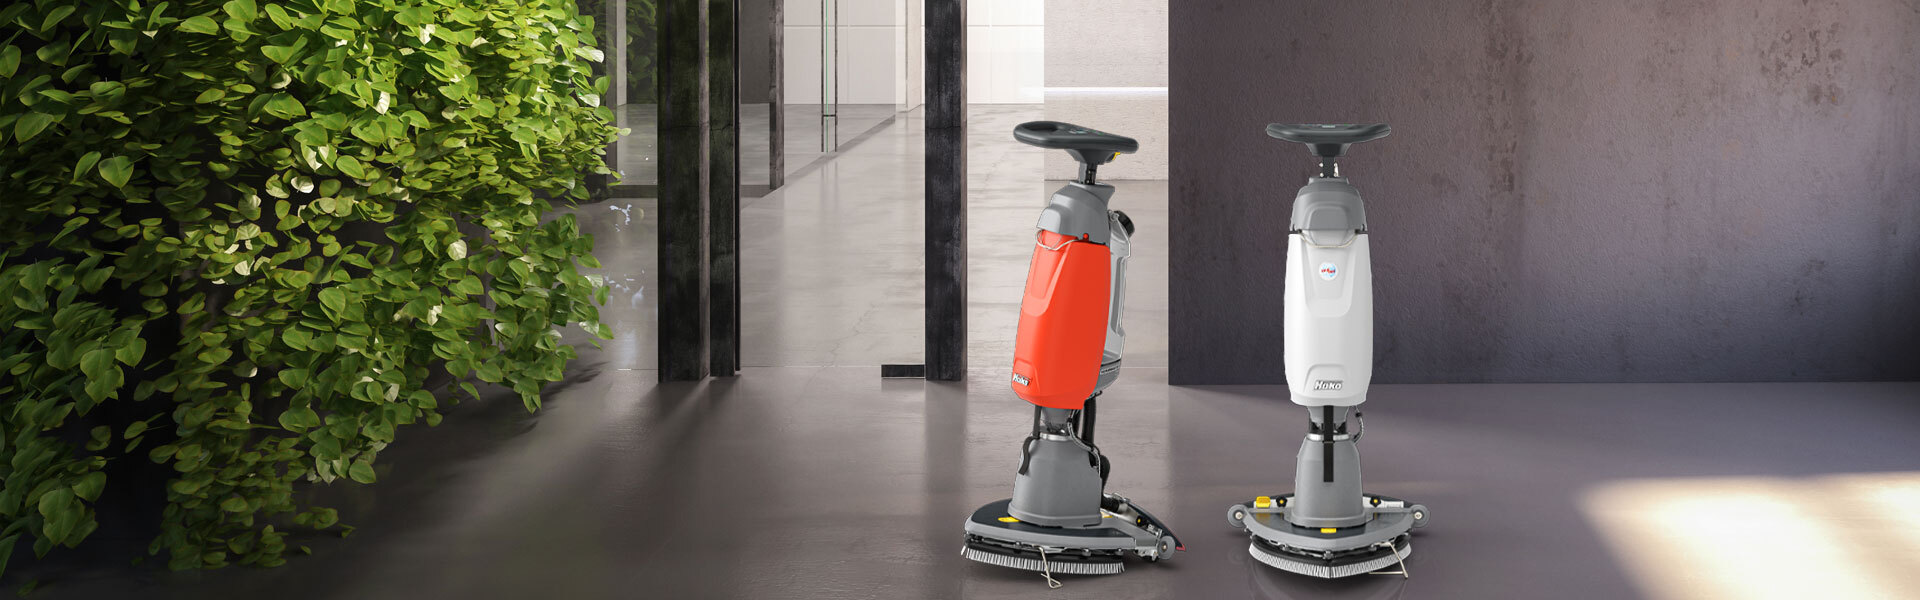 High-tech for wet cleaning small areas: Scrubmaster B5 ORB